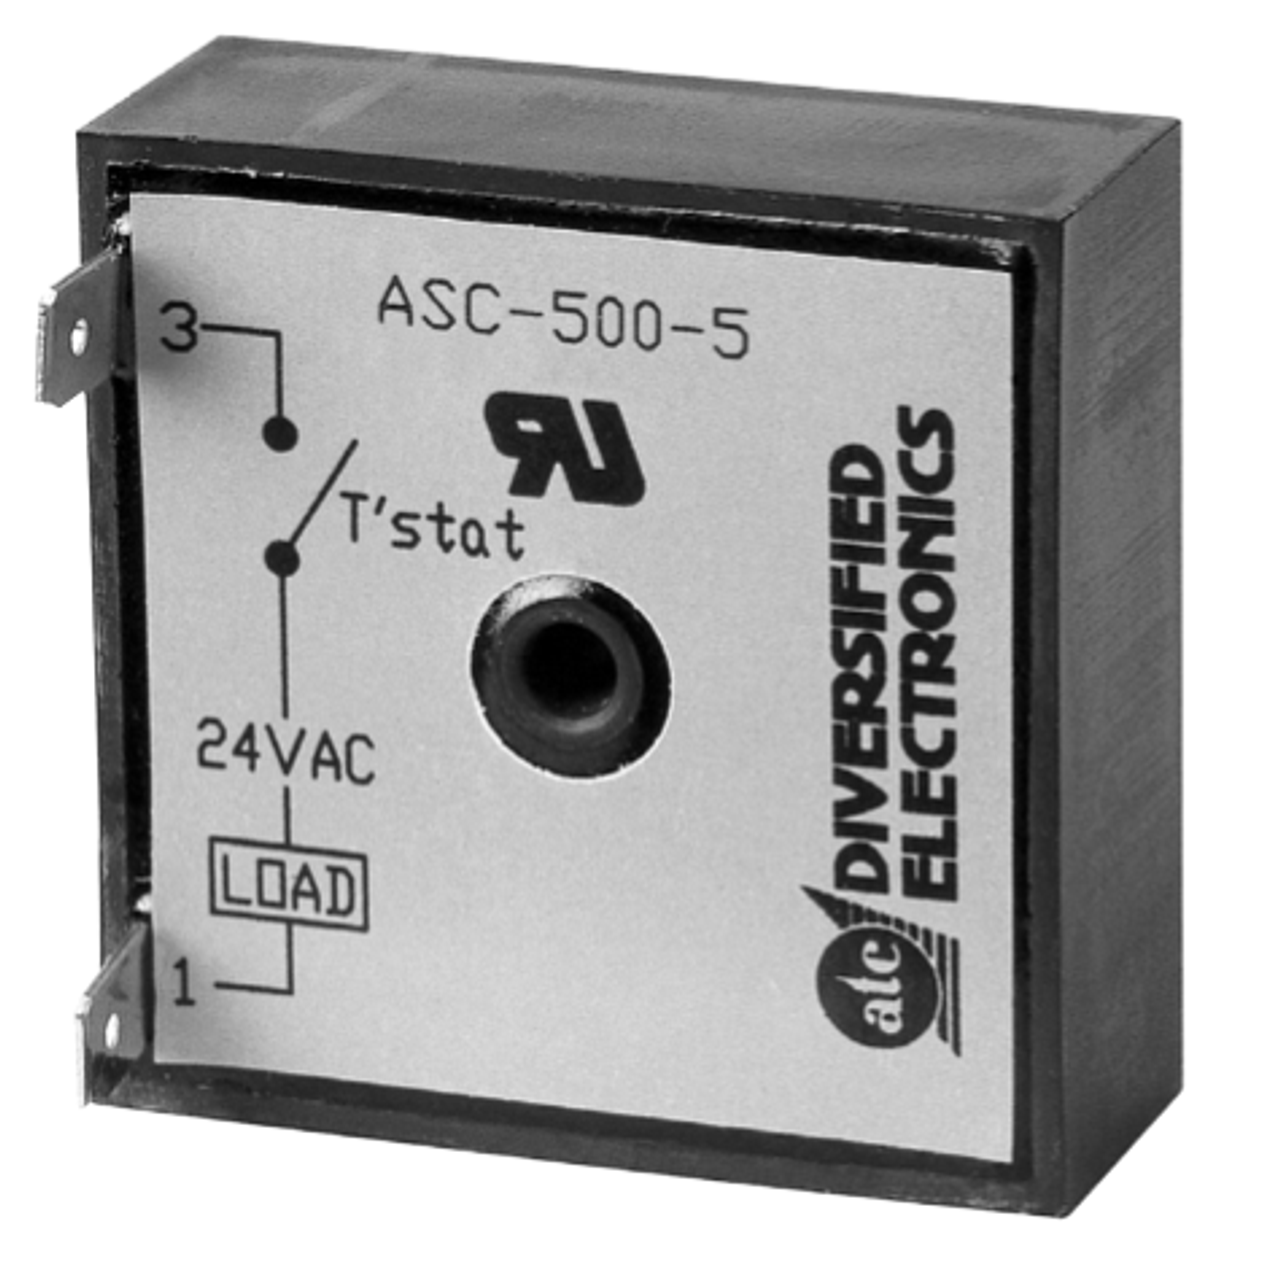 ATC Diversified - Time Delay Relays - ASC-5013